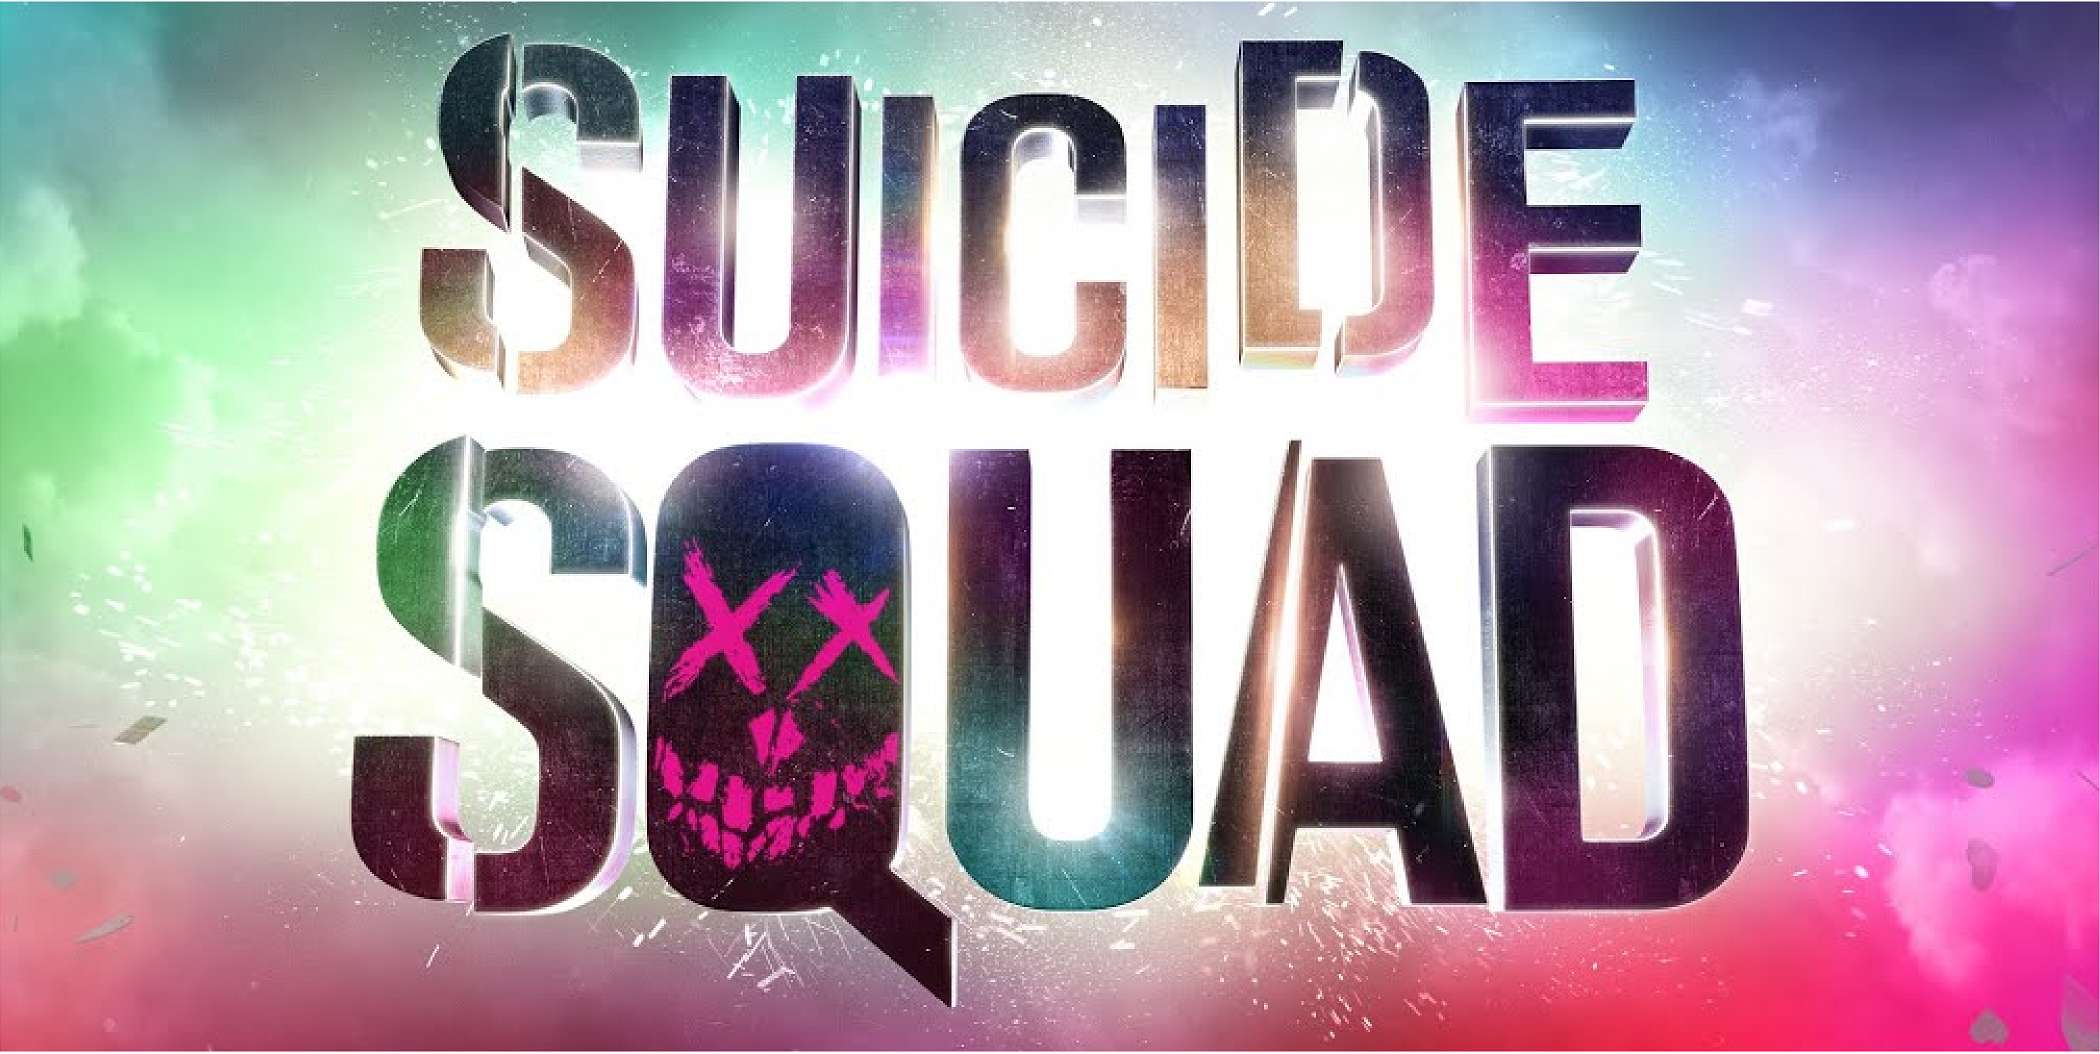 James Gunn’s Suicide Squad Working Title